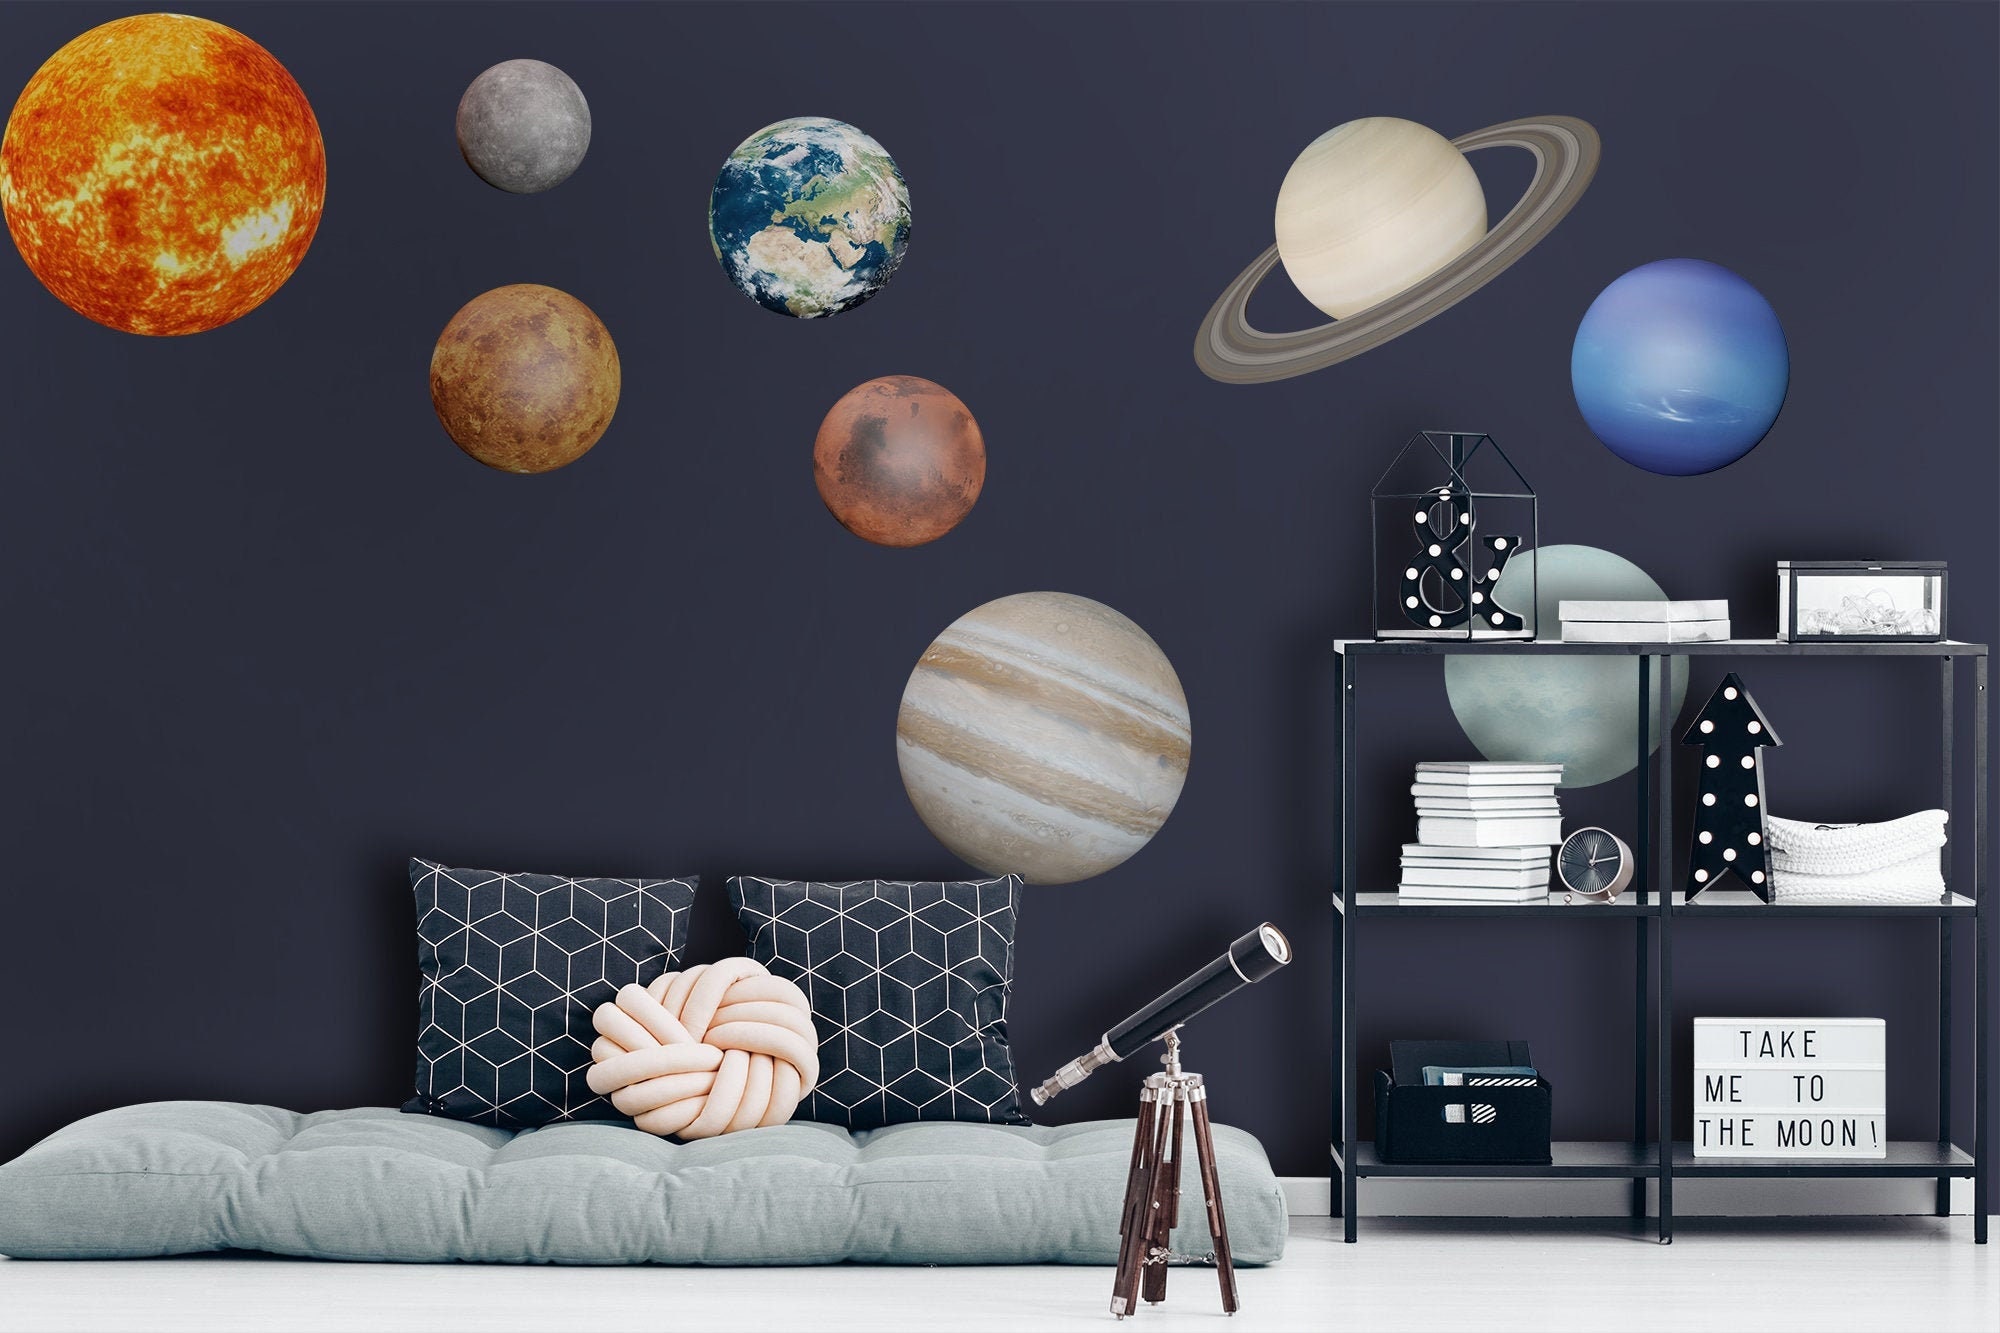 Planet Wall Stickers Solar System Wall Stickers Space Wall Stickers SSYS 02 